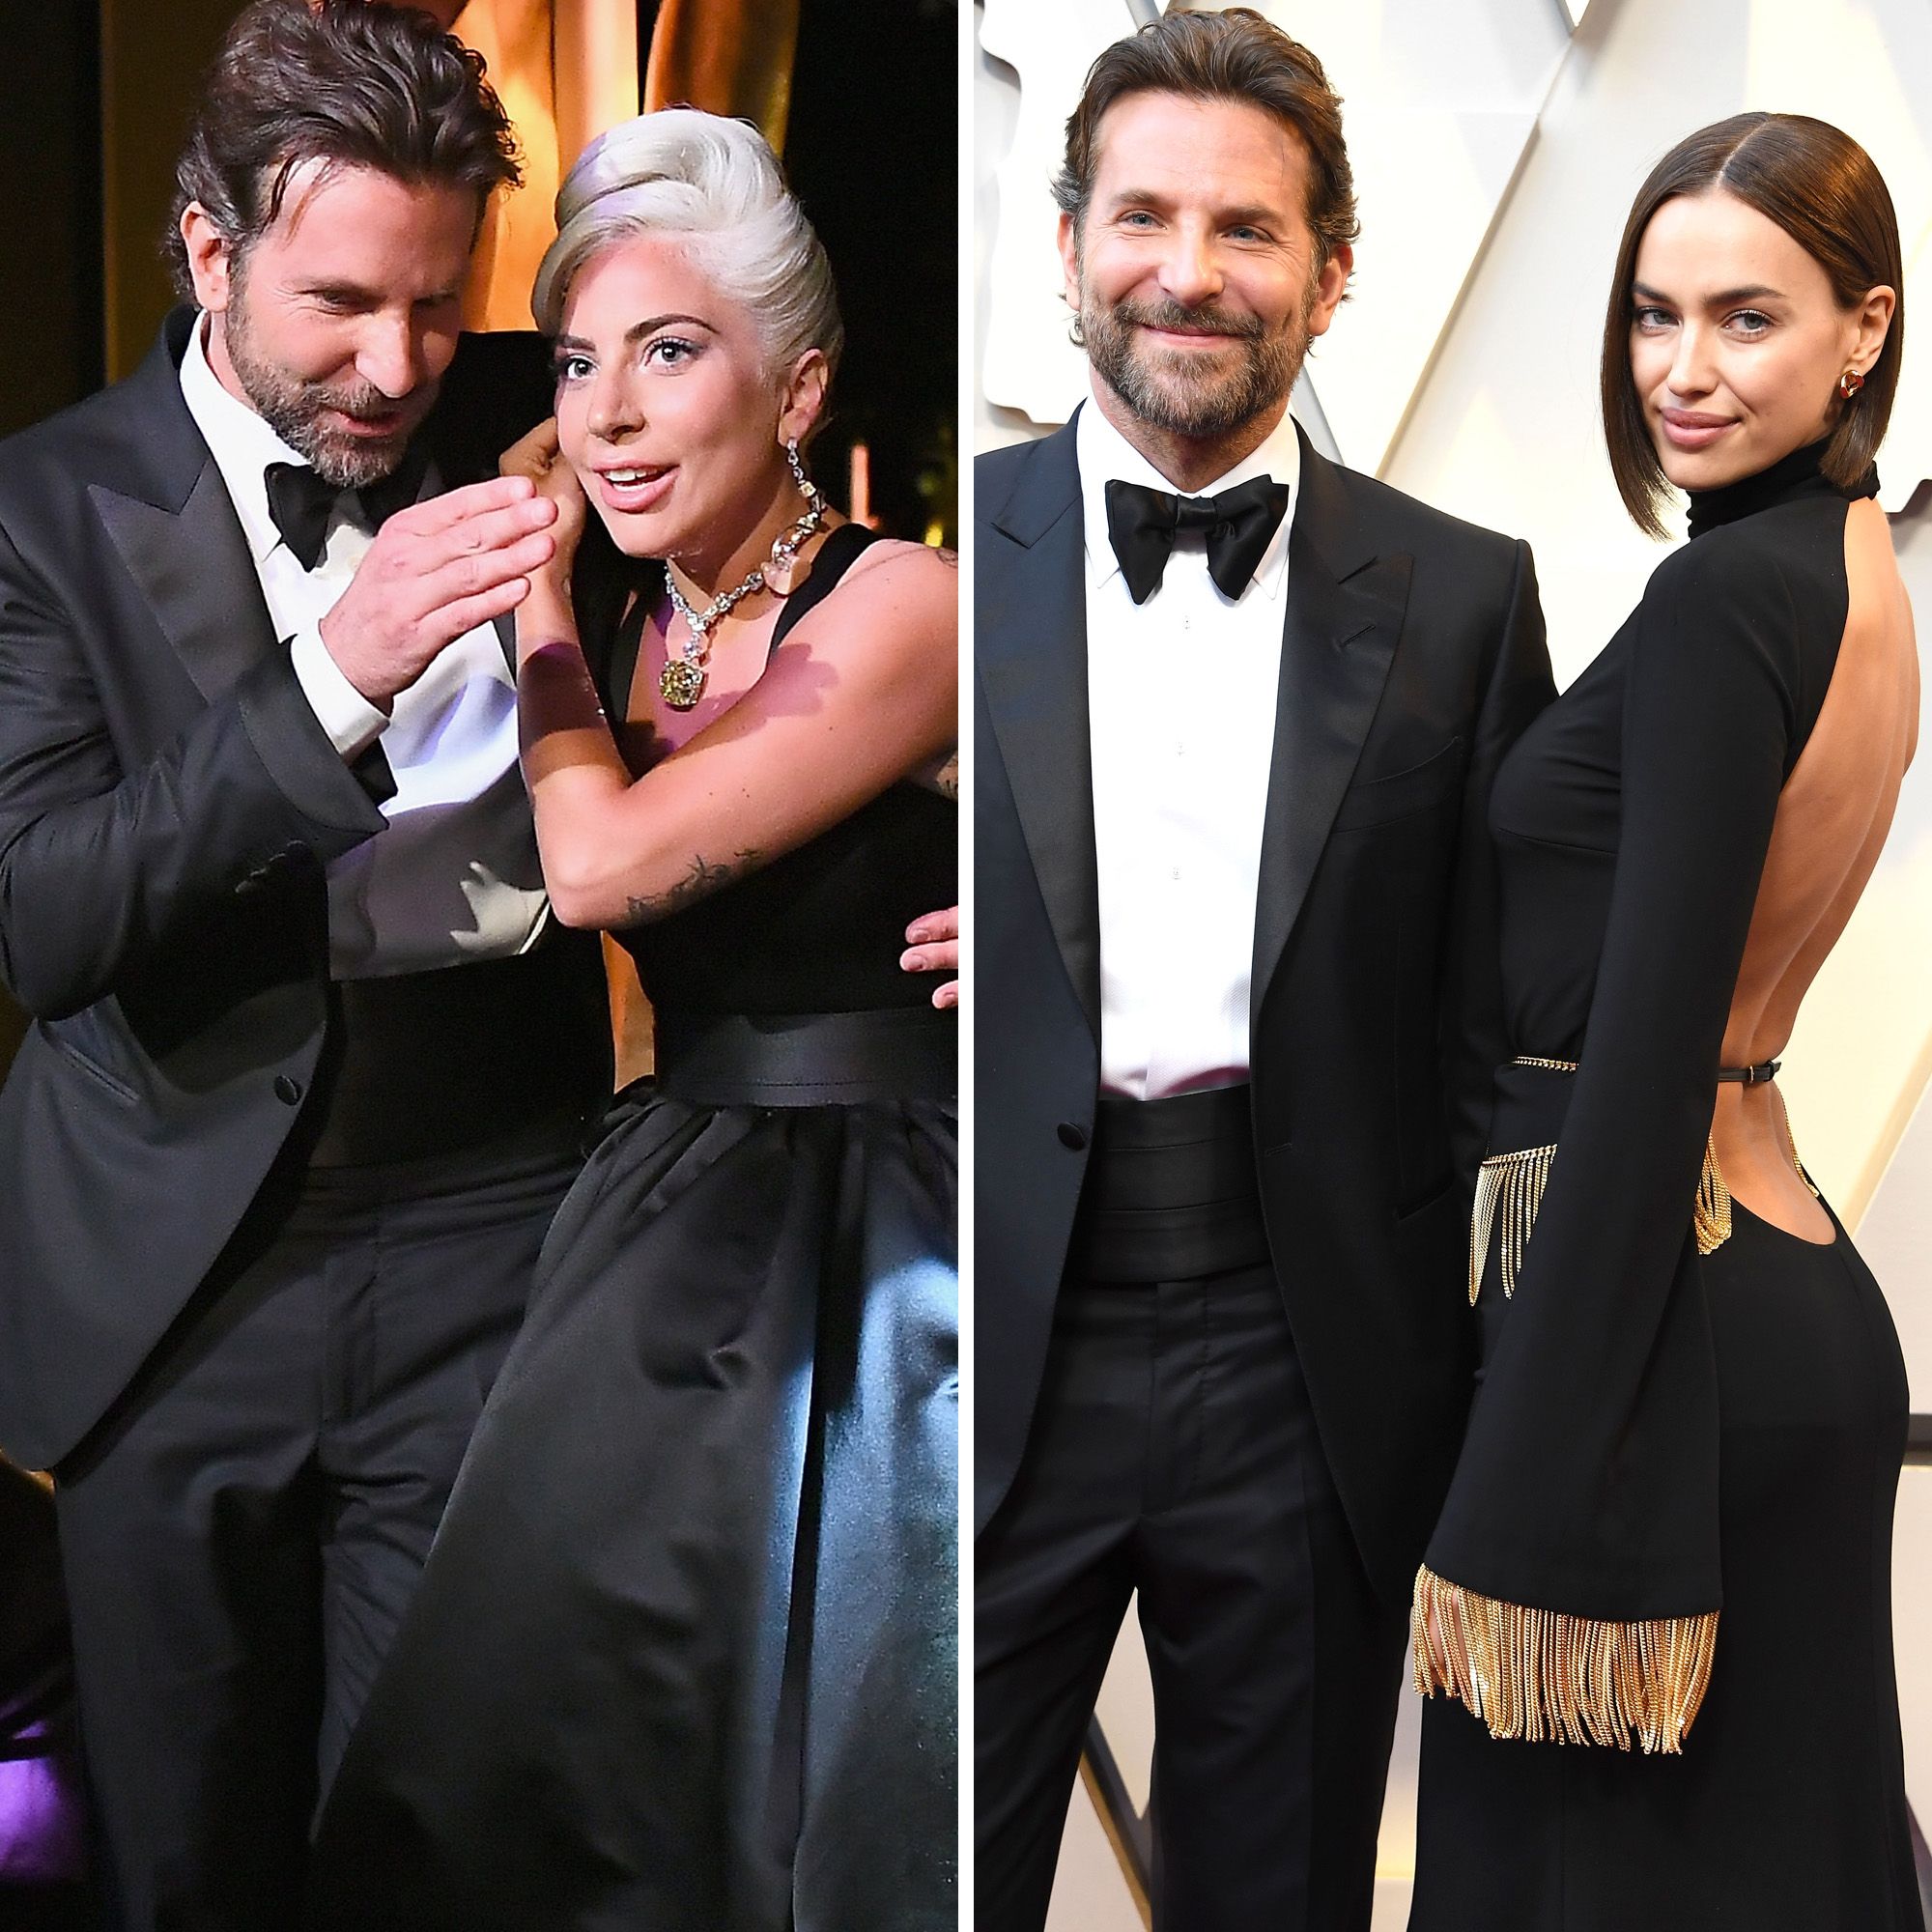 Bradley Cooper's Ex-Wife Comments on His Relationship With Gaga